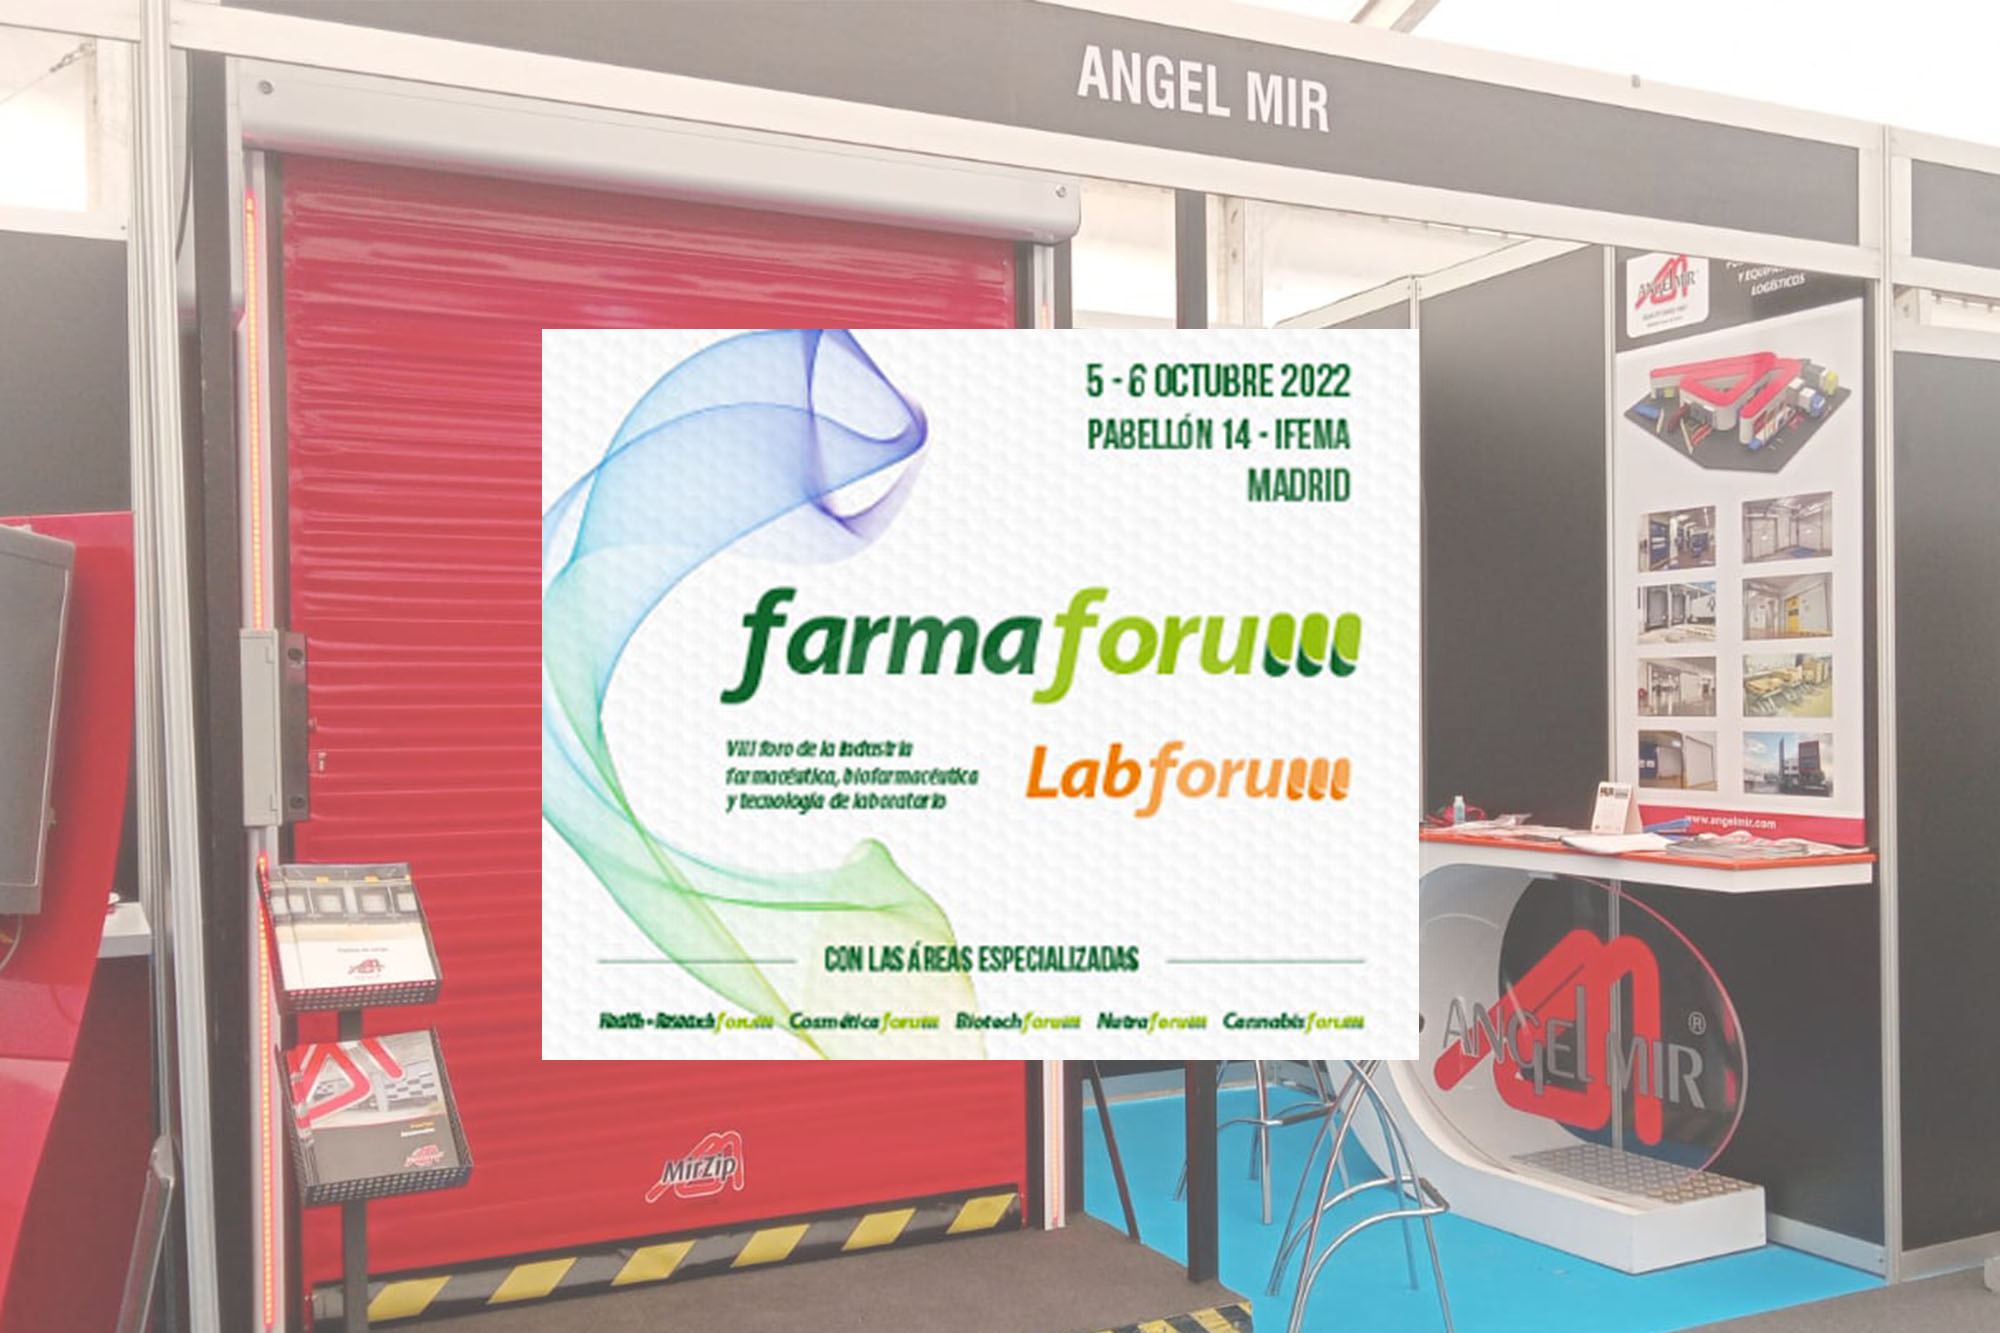 We launche a new model of hig-speed door for clean rooms at Farmaforum